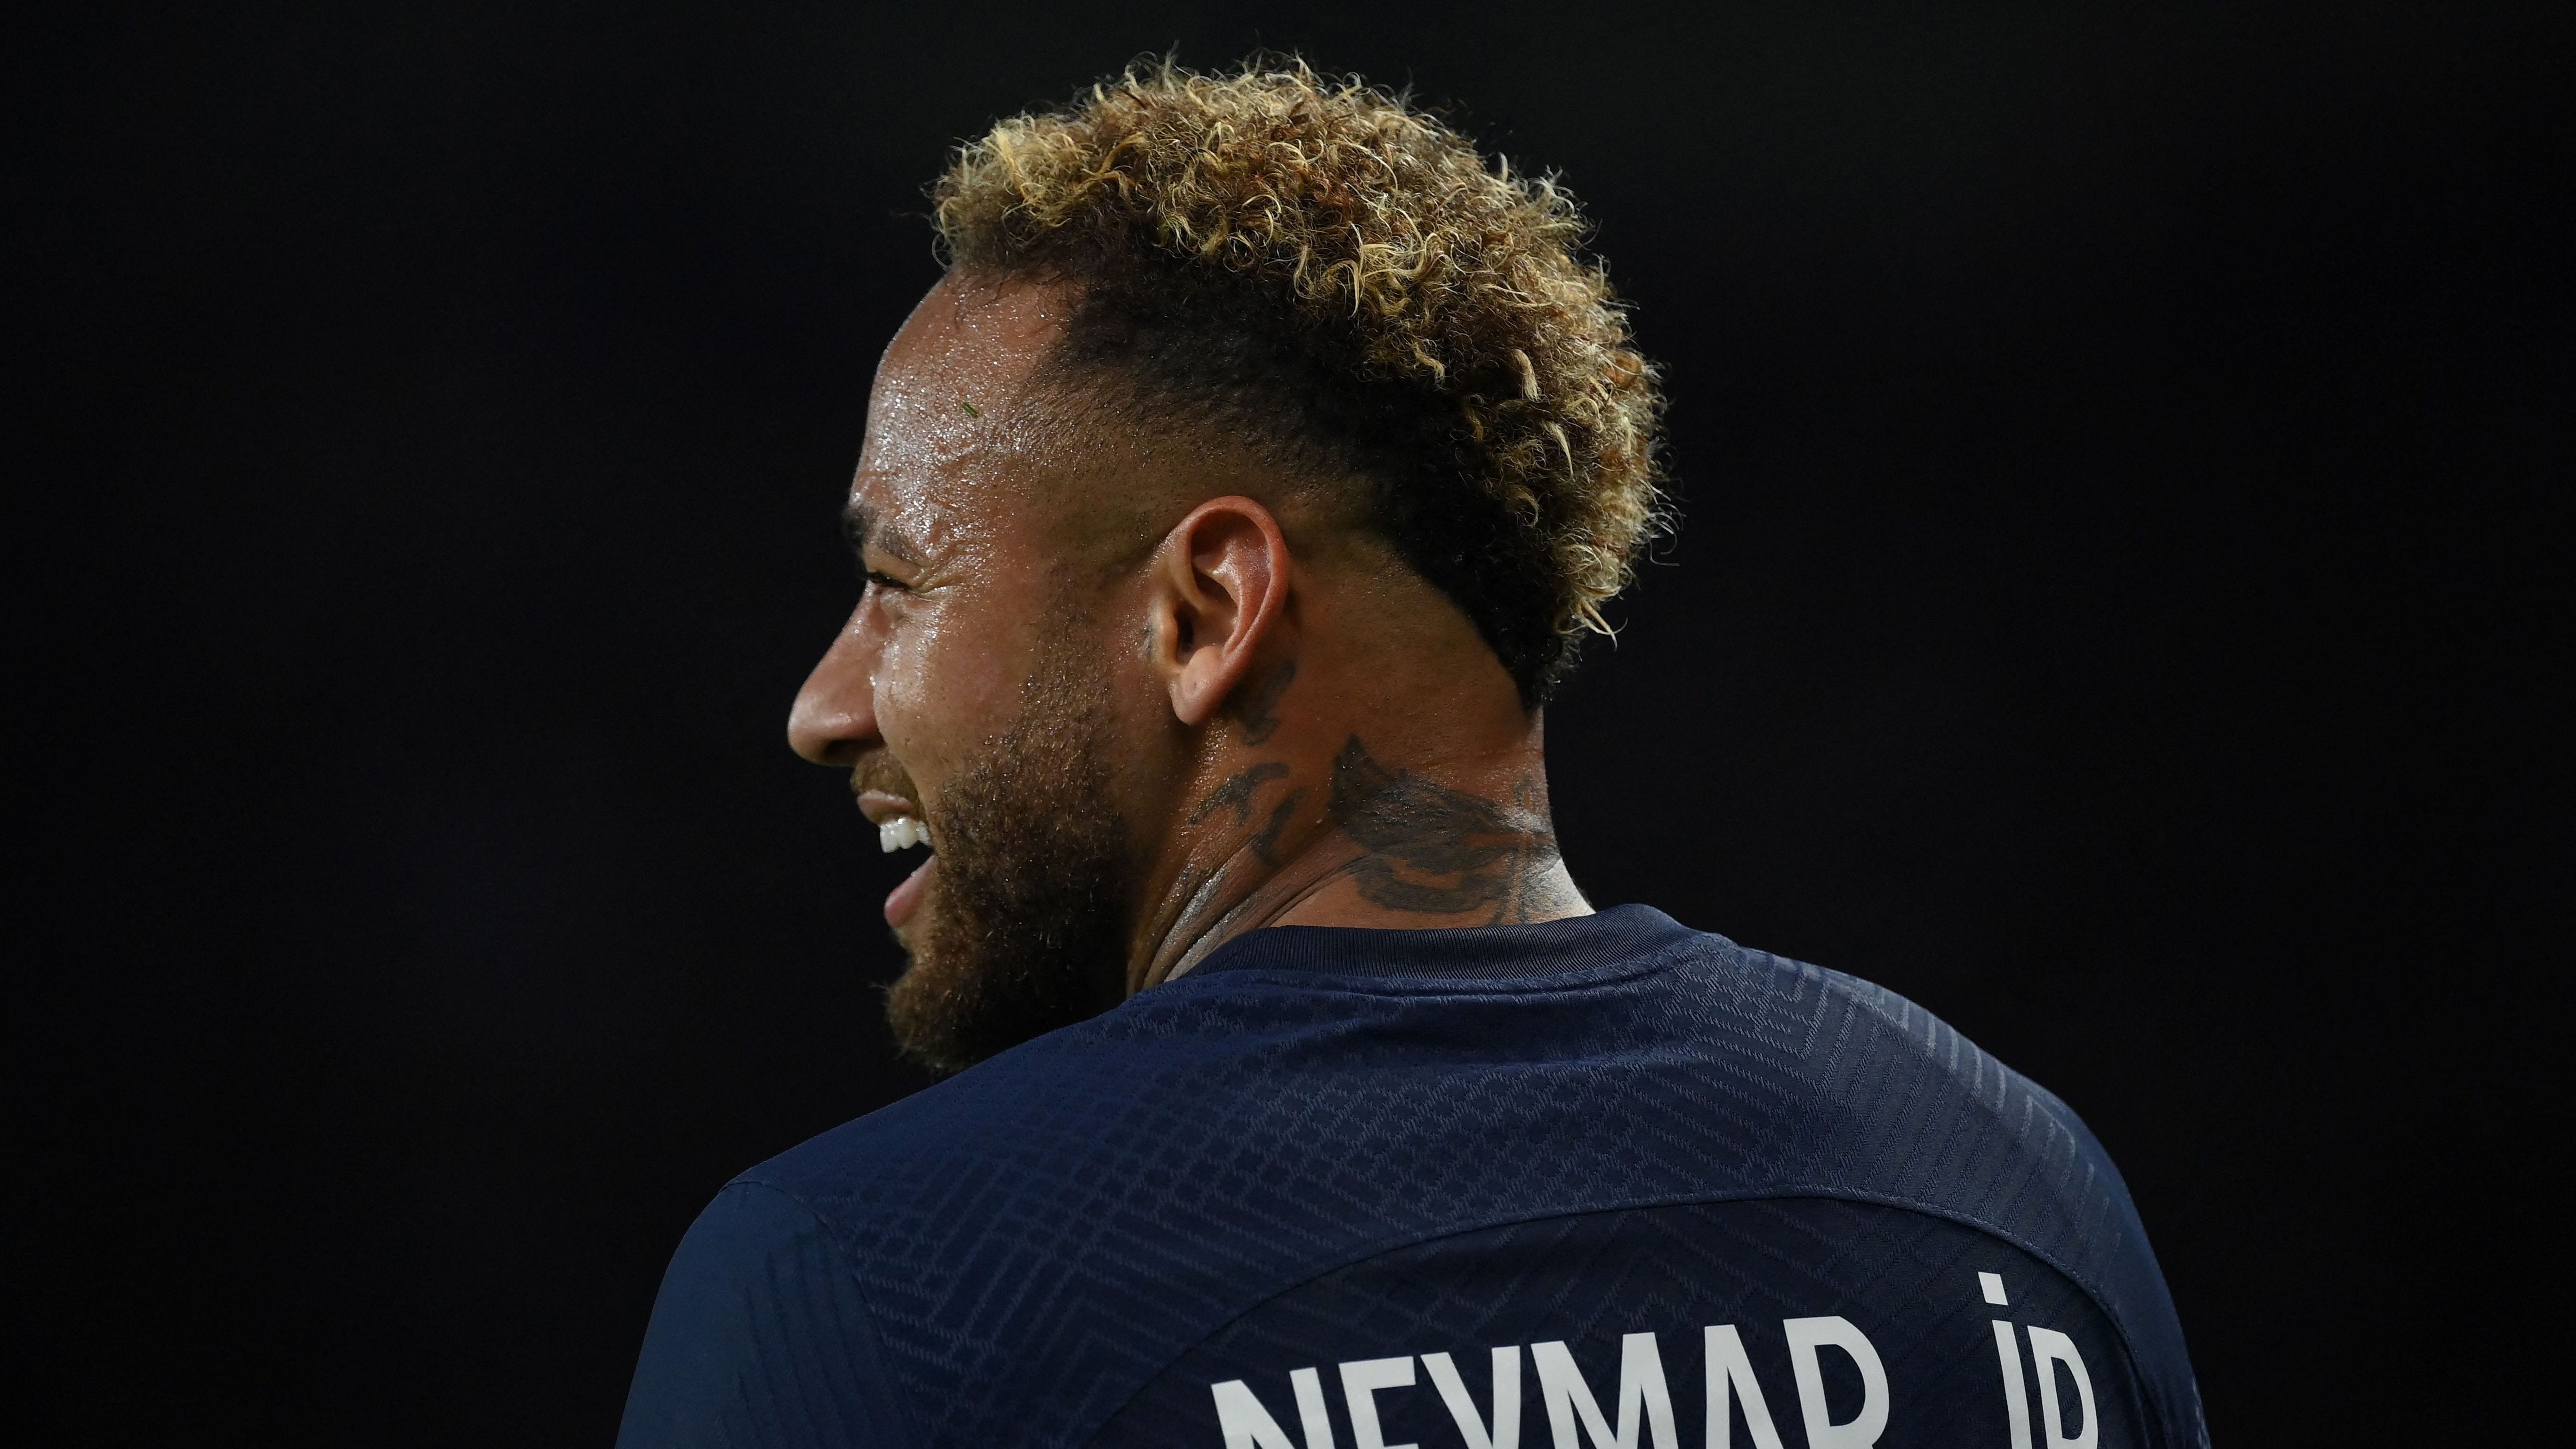 17 Coolest Neymar Jr. Hairstyles to Copy in 2023 – Hairstyle Camp